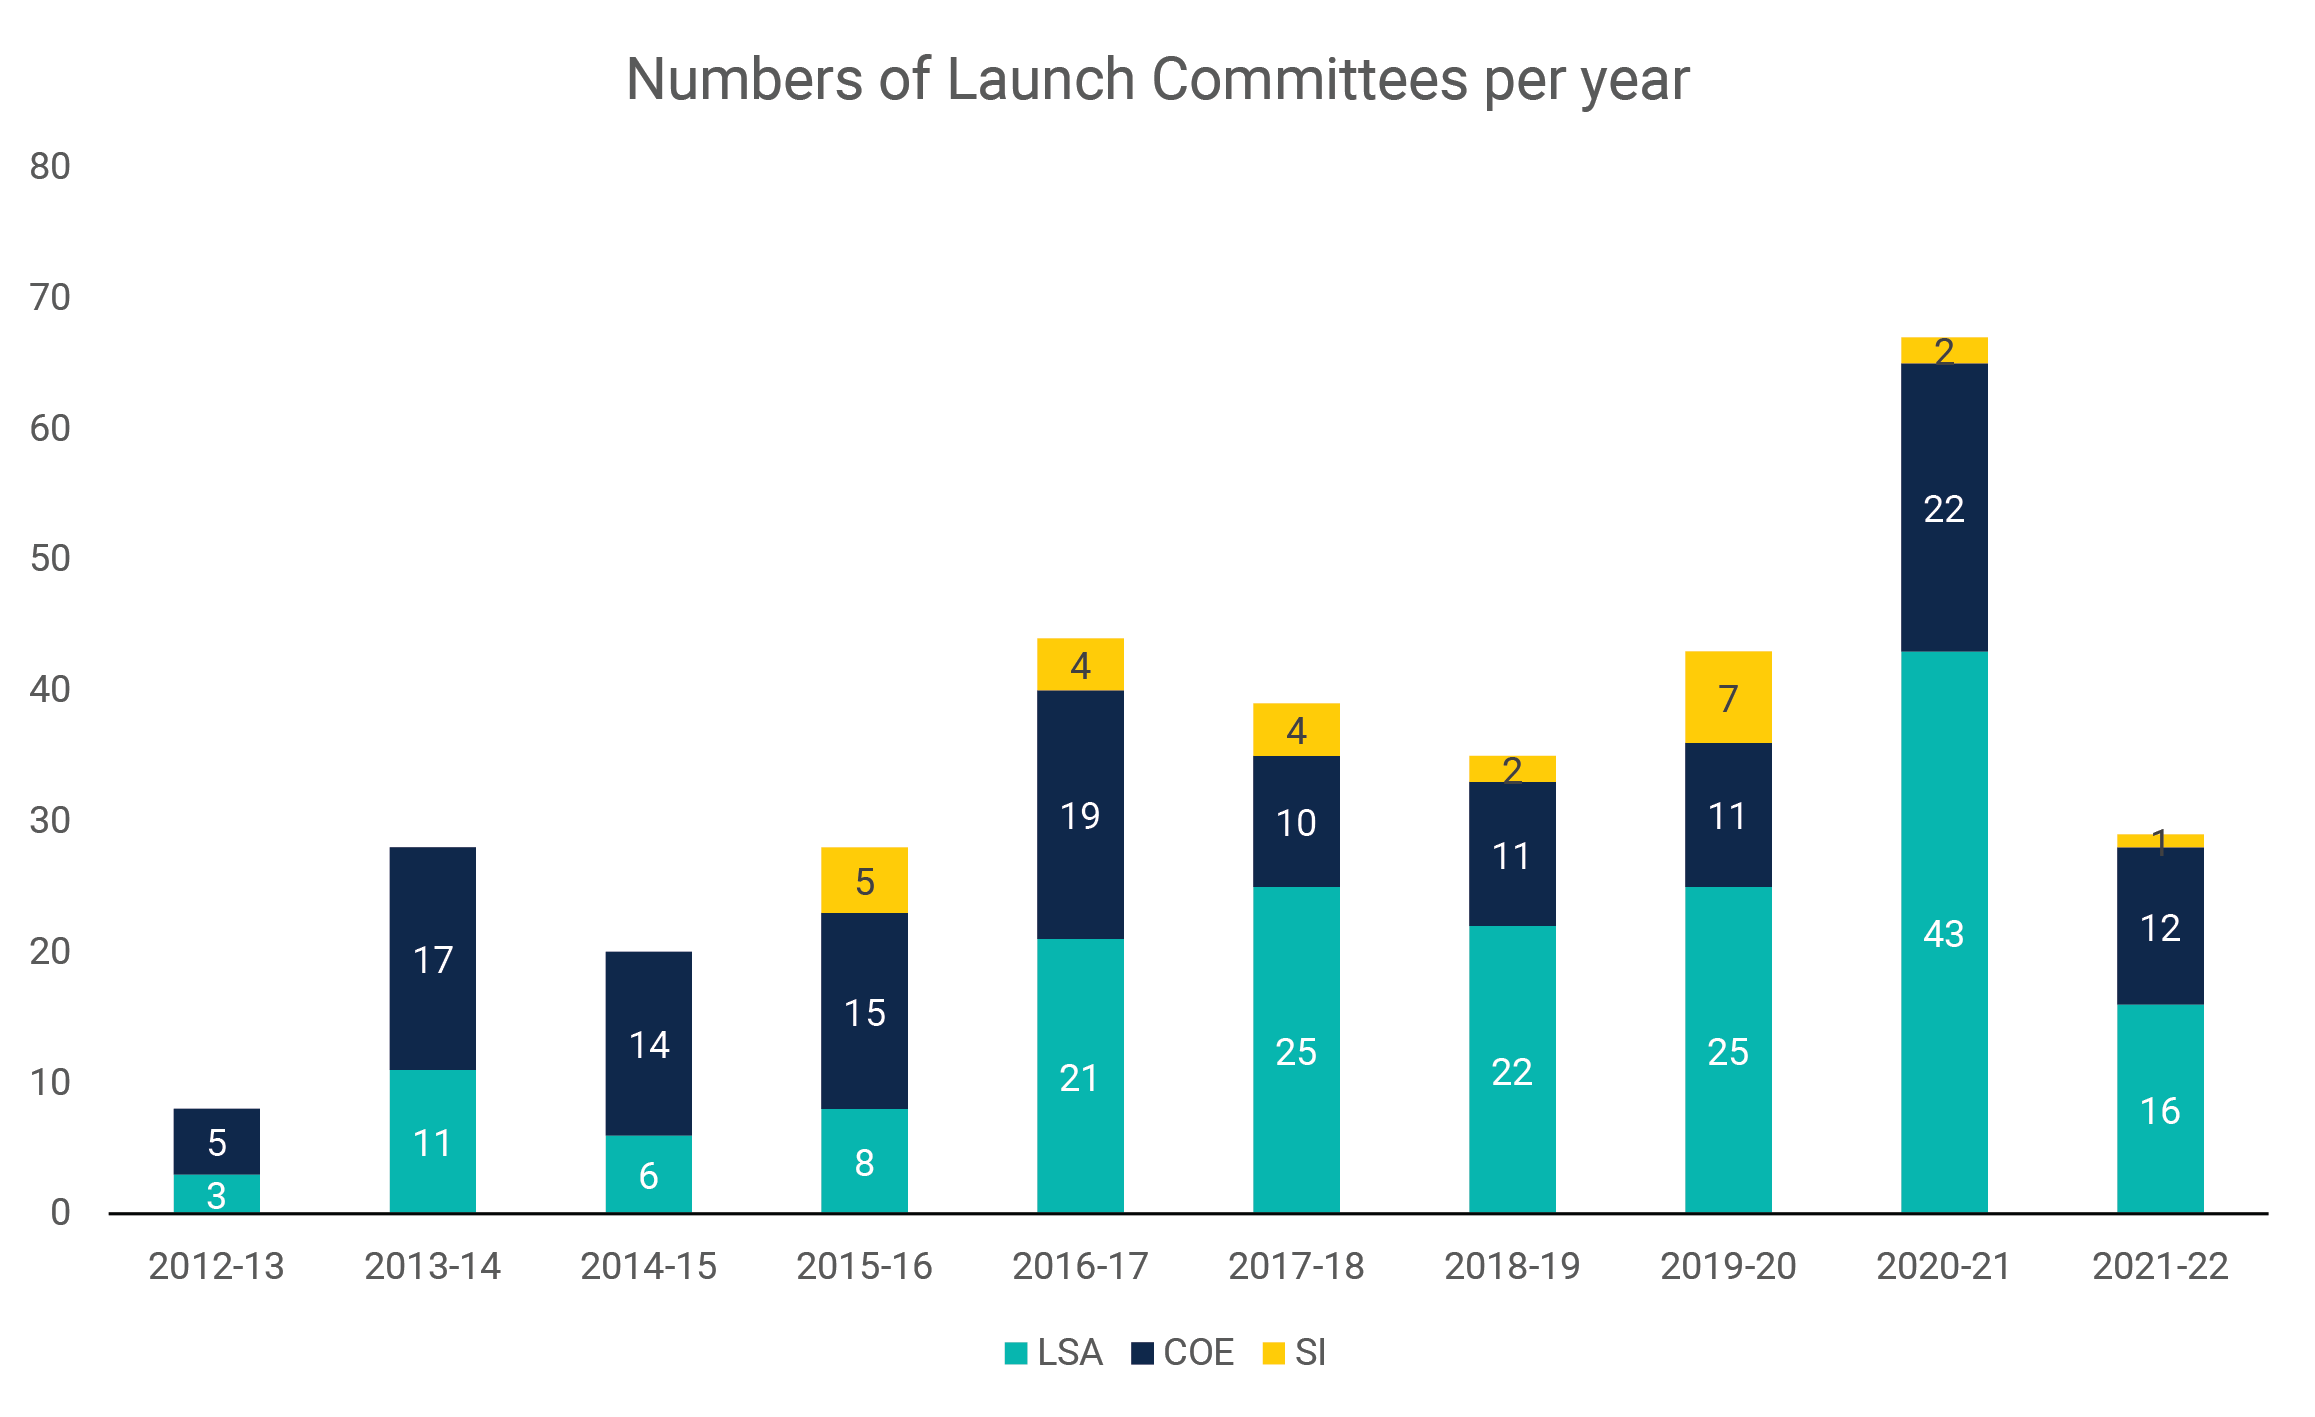 launch committee chart by year. 2022 16 CoE, 12 LSA, 1 SI